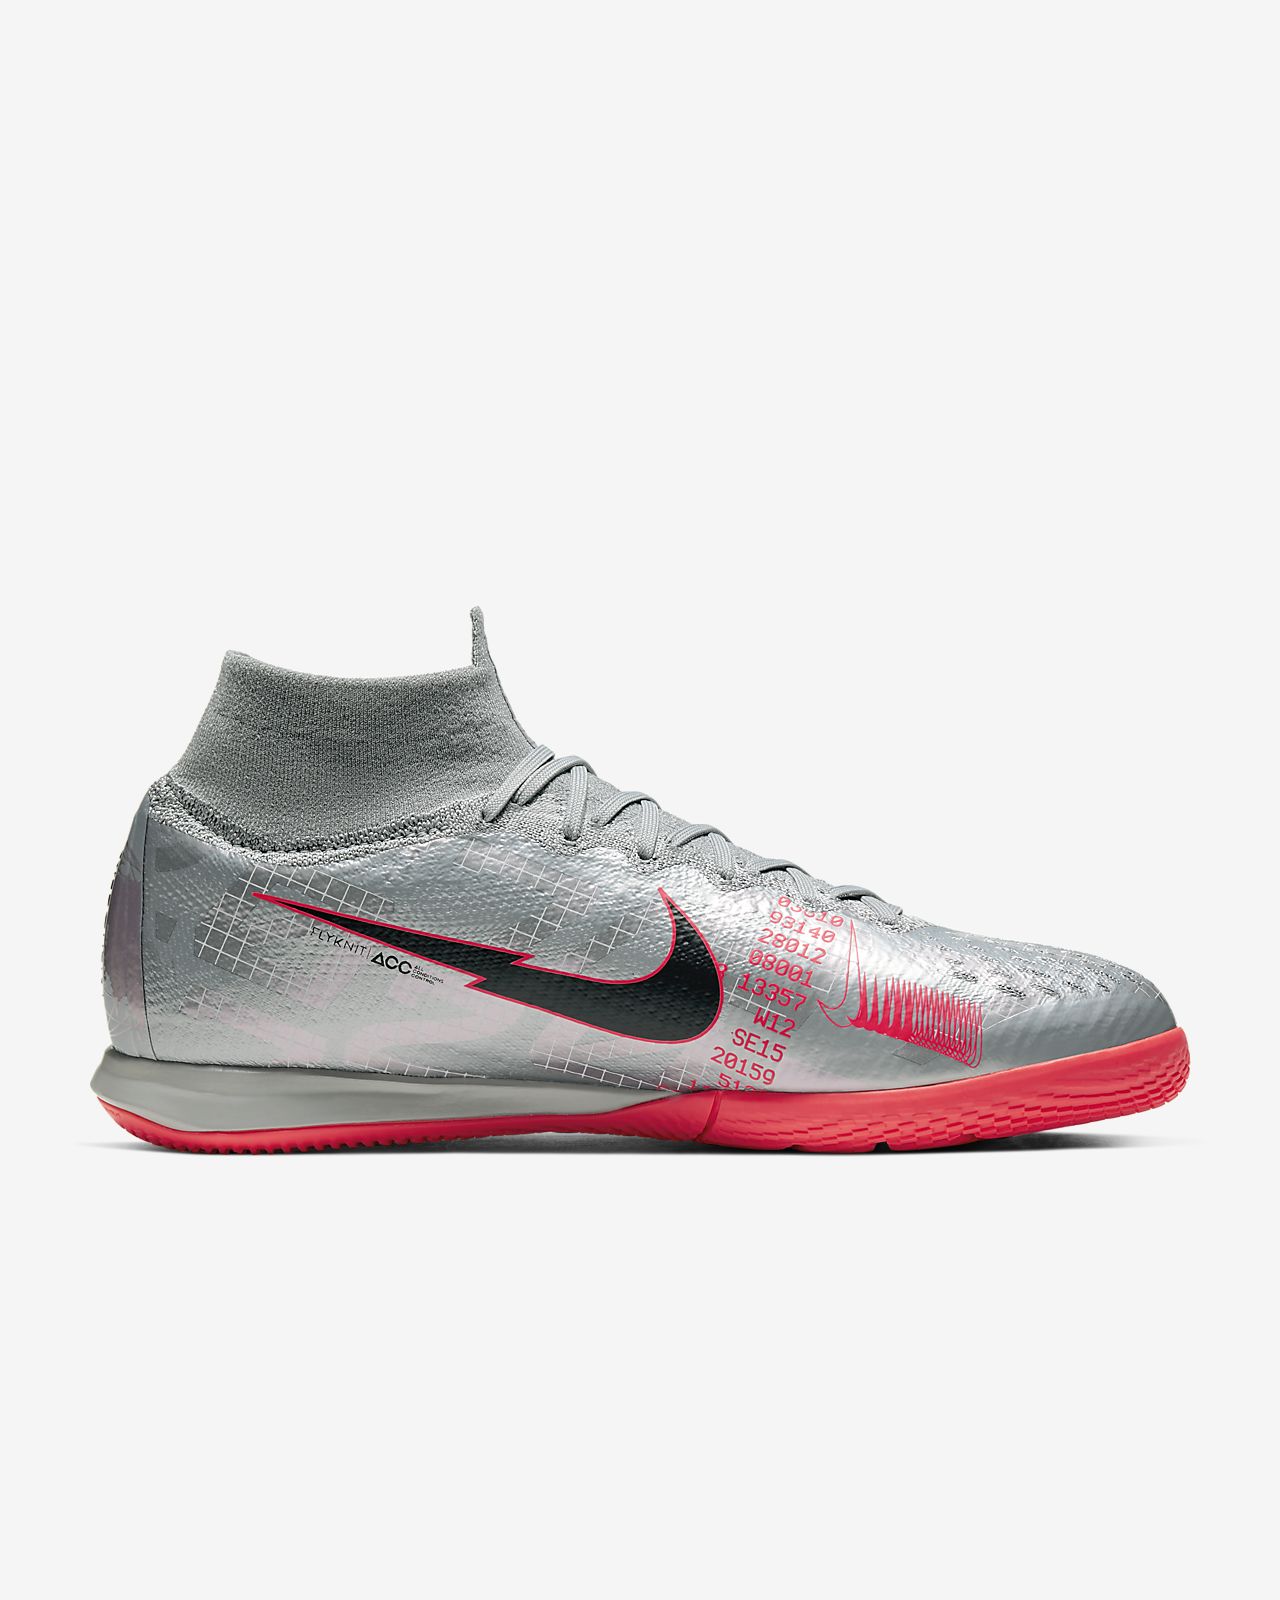 Nike Superfly 6 Elite Fg Wolf Gray Red Size 9.5 Oly for sale.